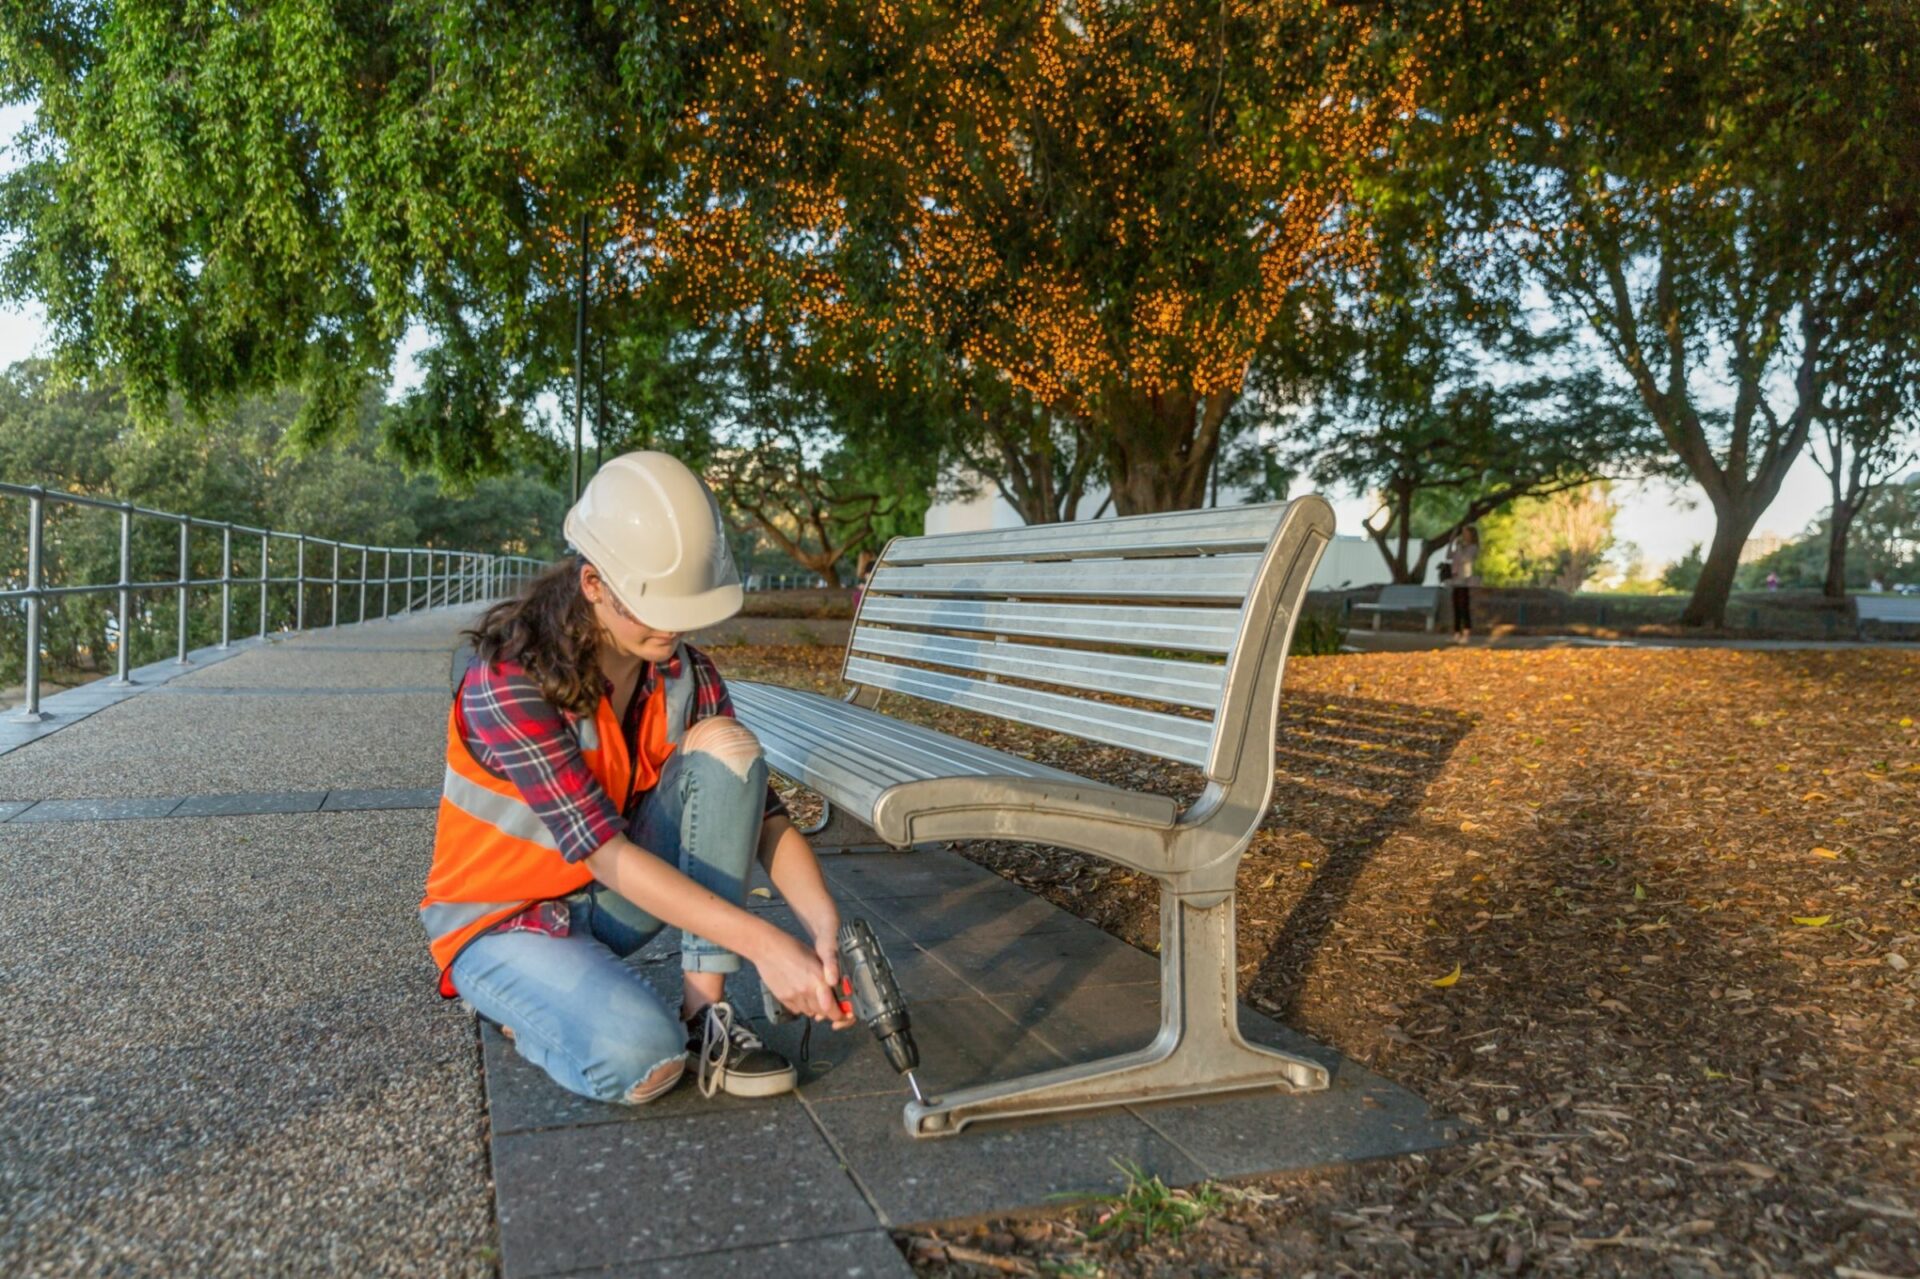 Incorporating features like seating into public spaces can be one way of thinking about “care” in design. Another is considering how the space will be maintained — and the people who will do the maintenance. Photographer: Marianne Purdie/Moment RF